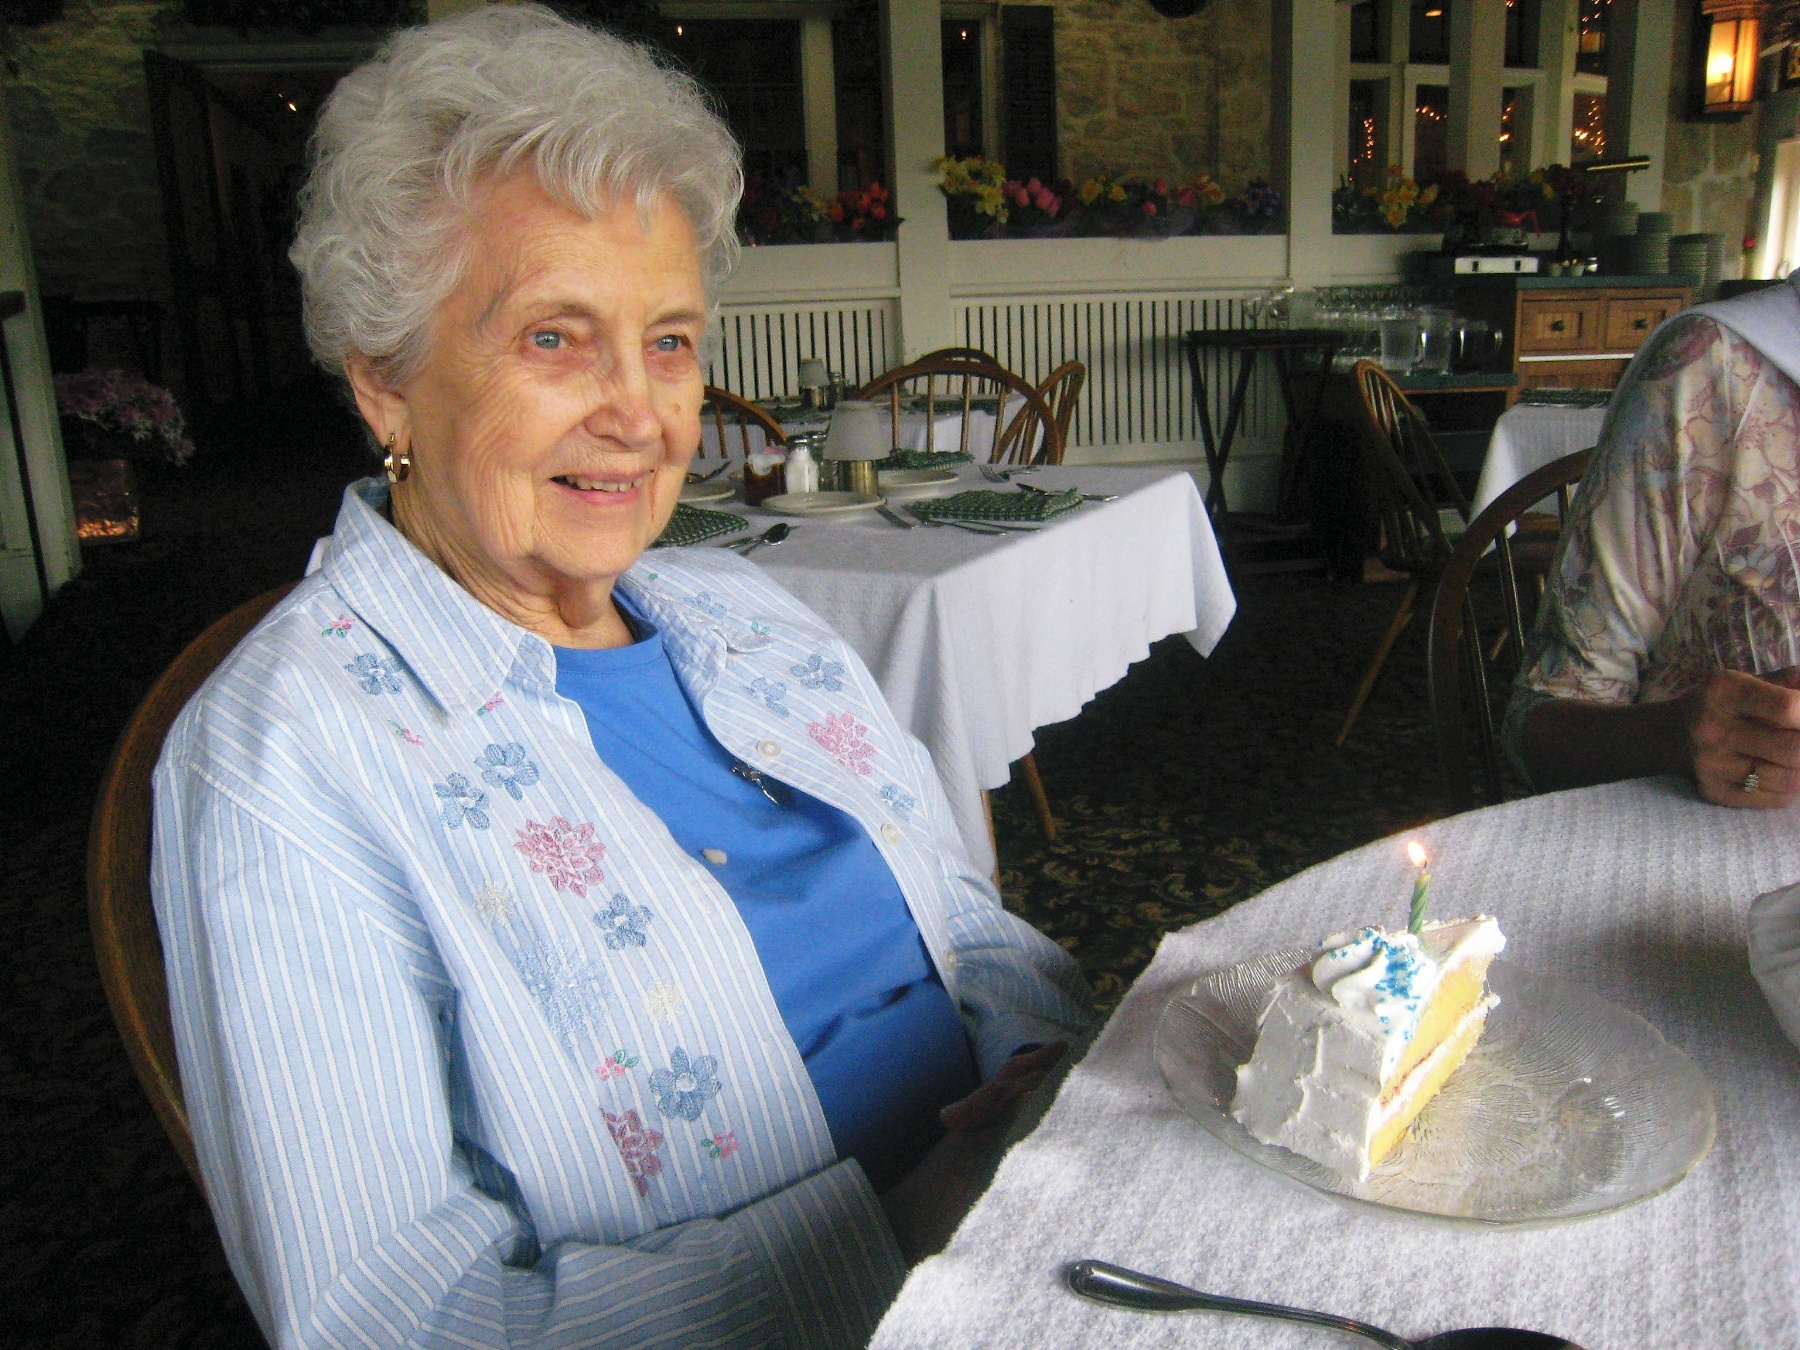 Flo, having her cake and eating it, too, at 93.